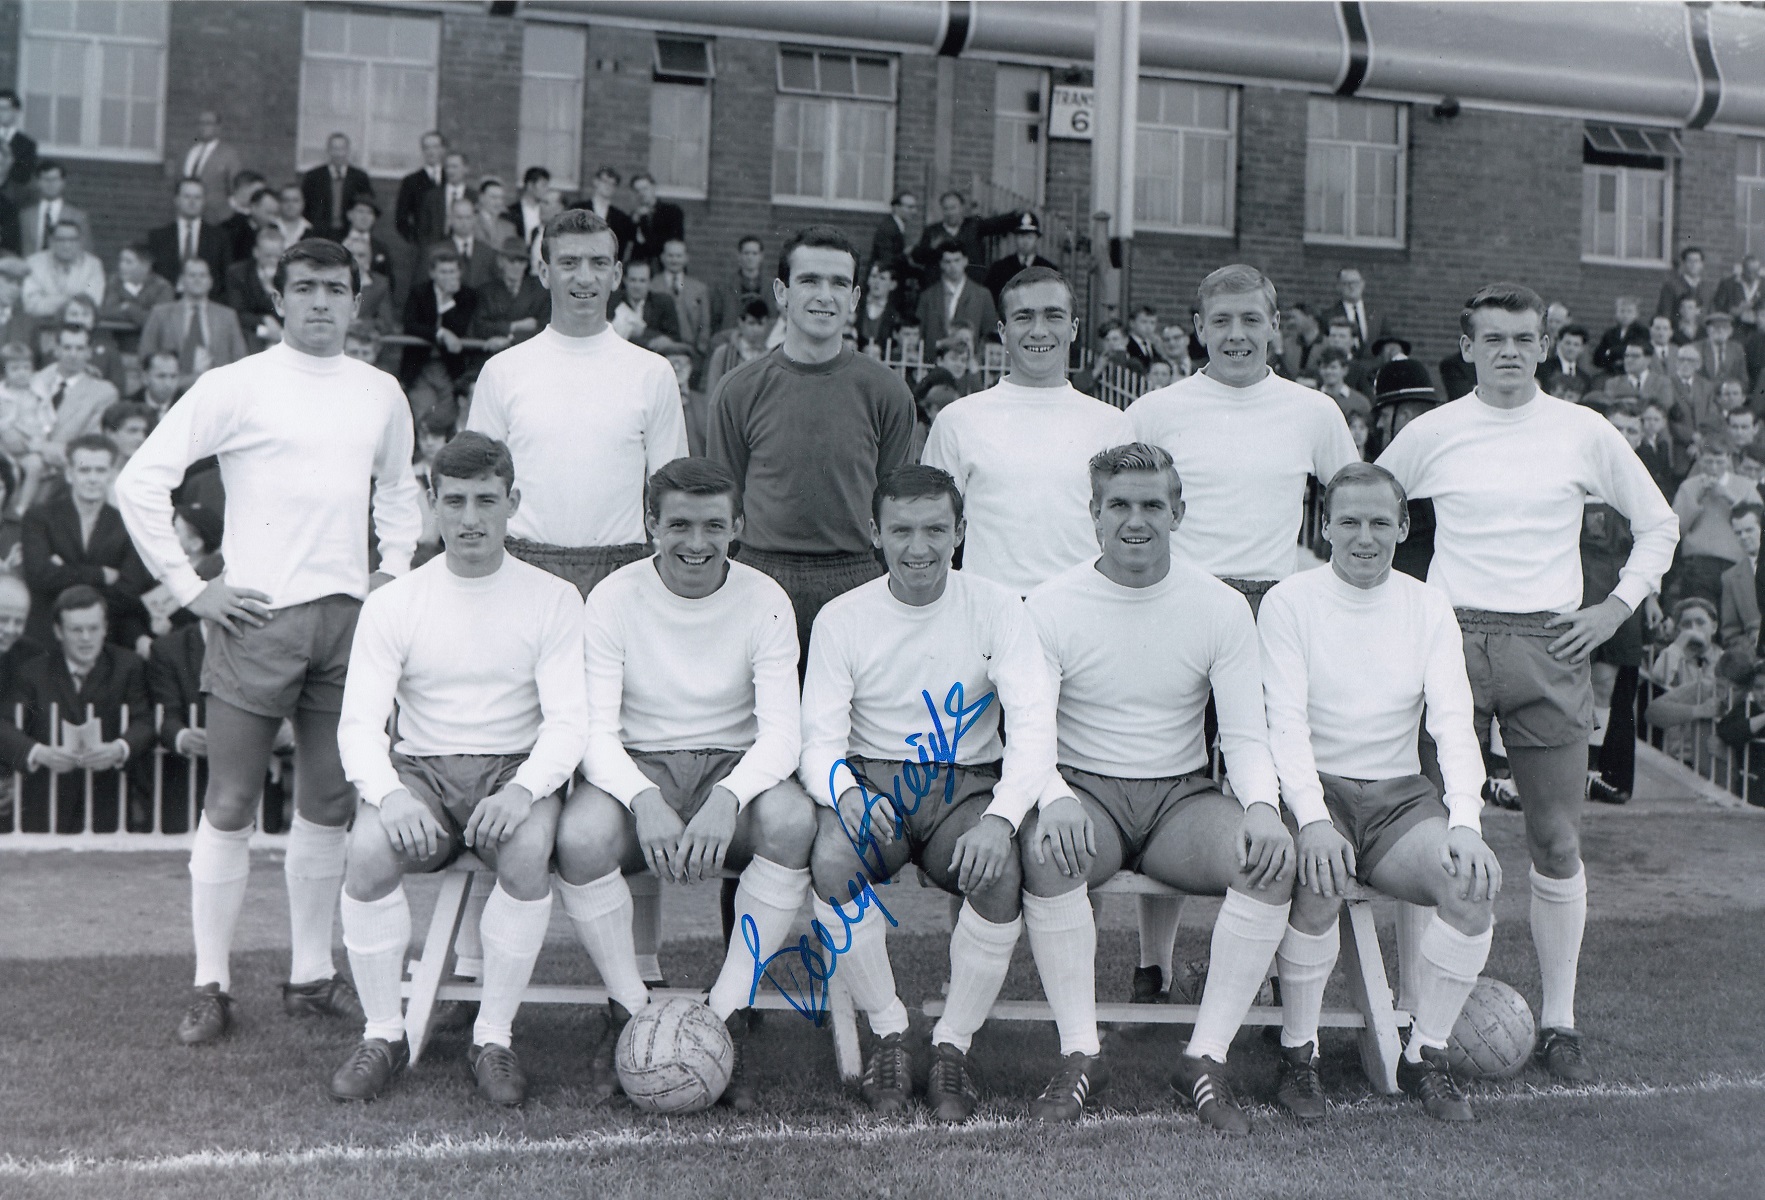 Football Autographed Barry Bridges Photo, A Superb Image Depicting Chelsea Players Posing For A Team